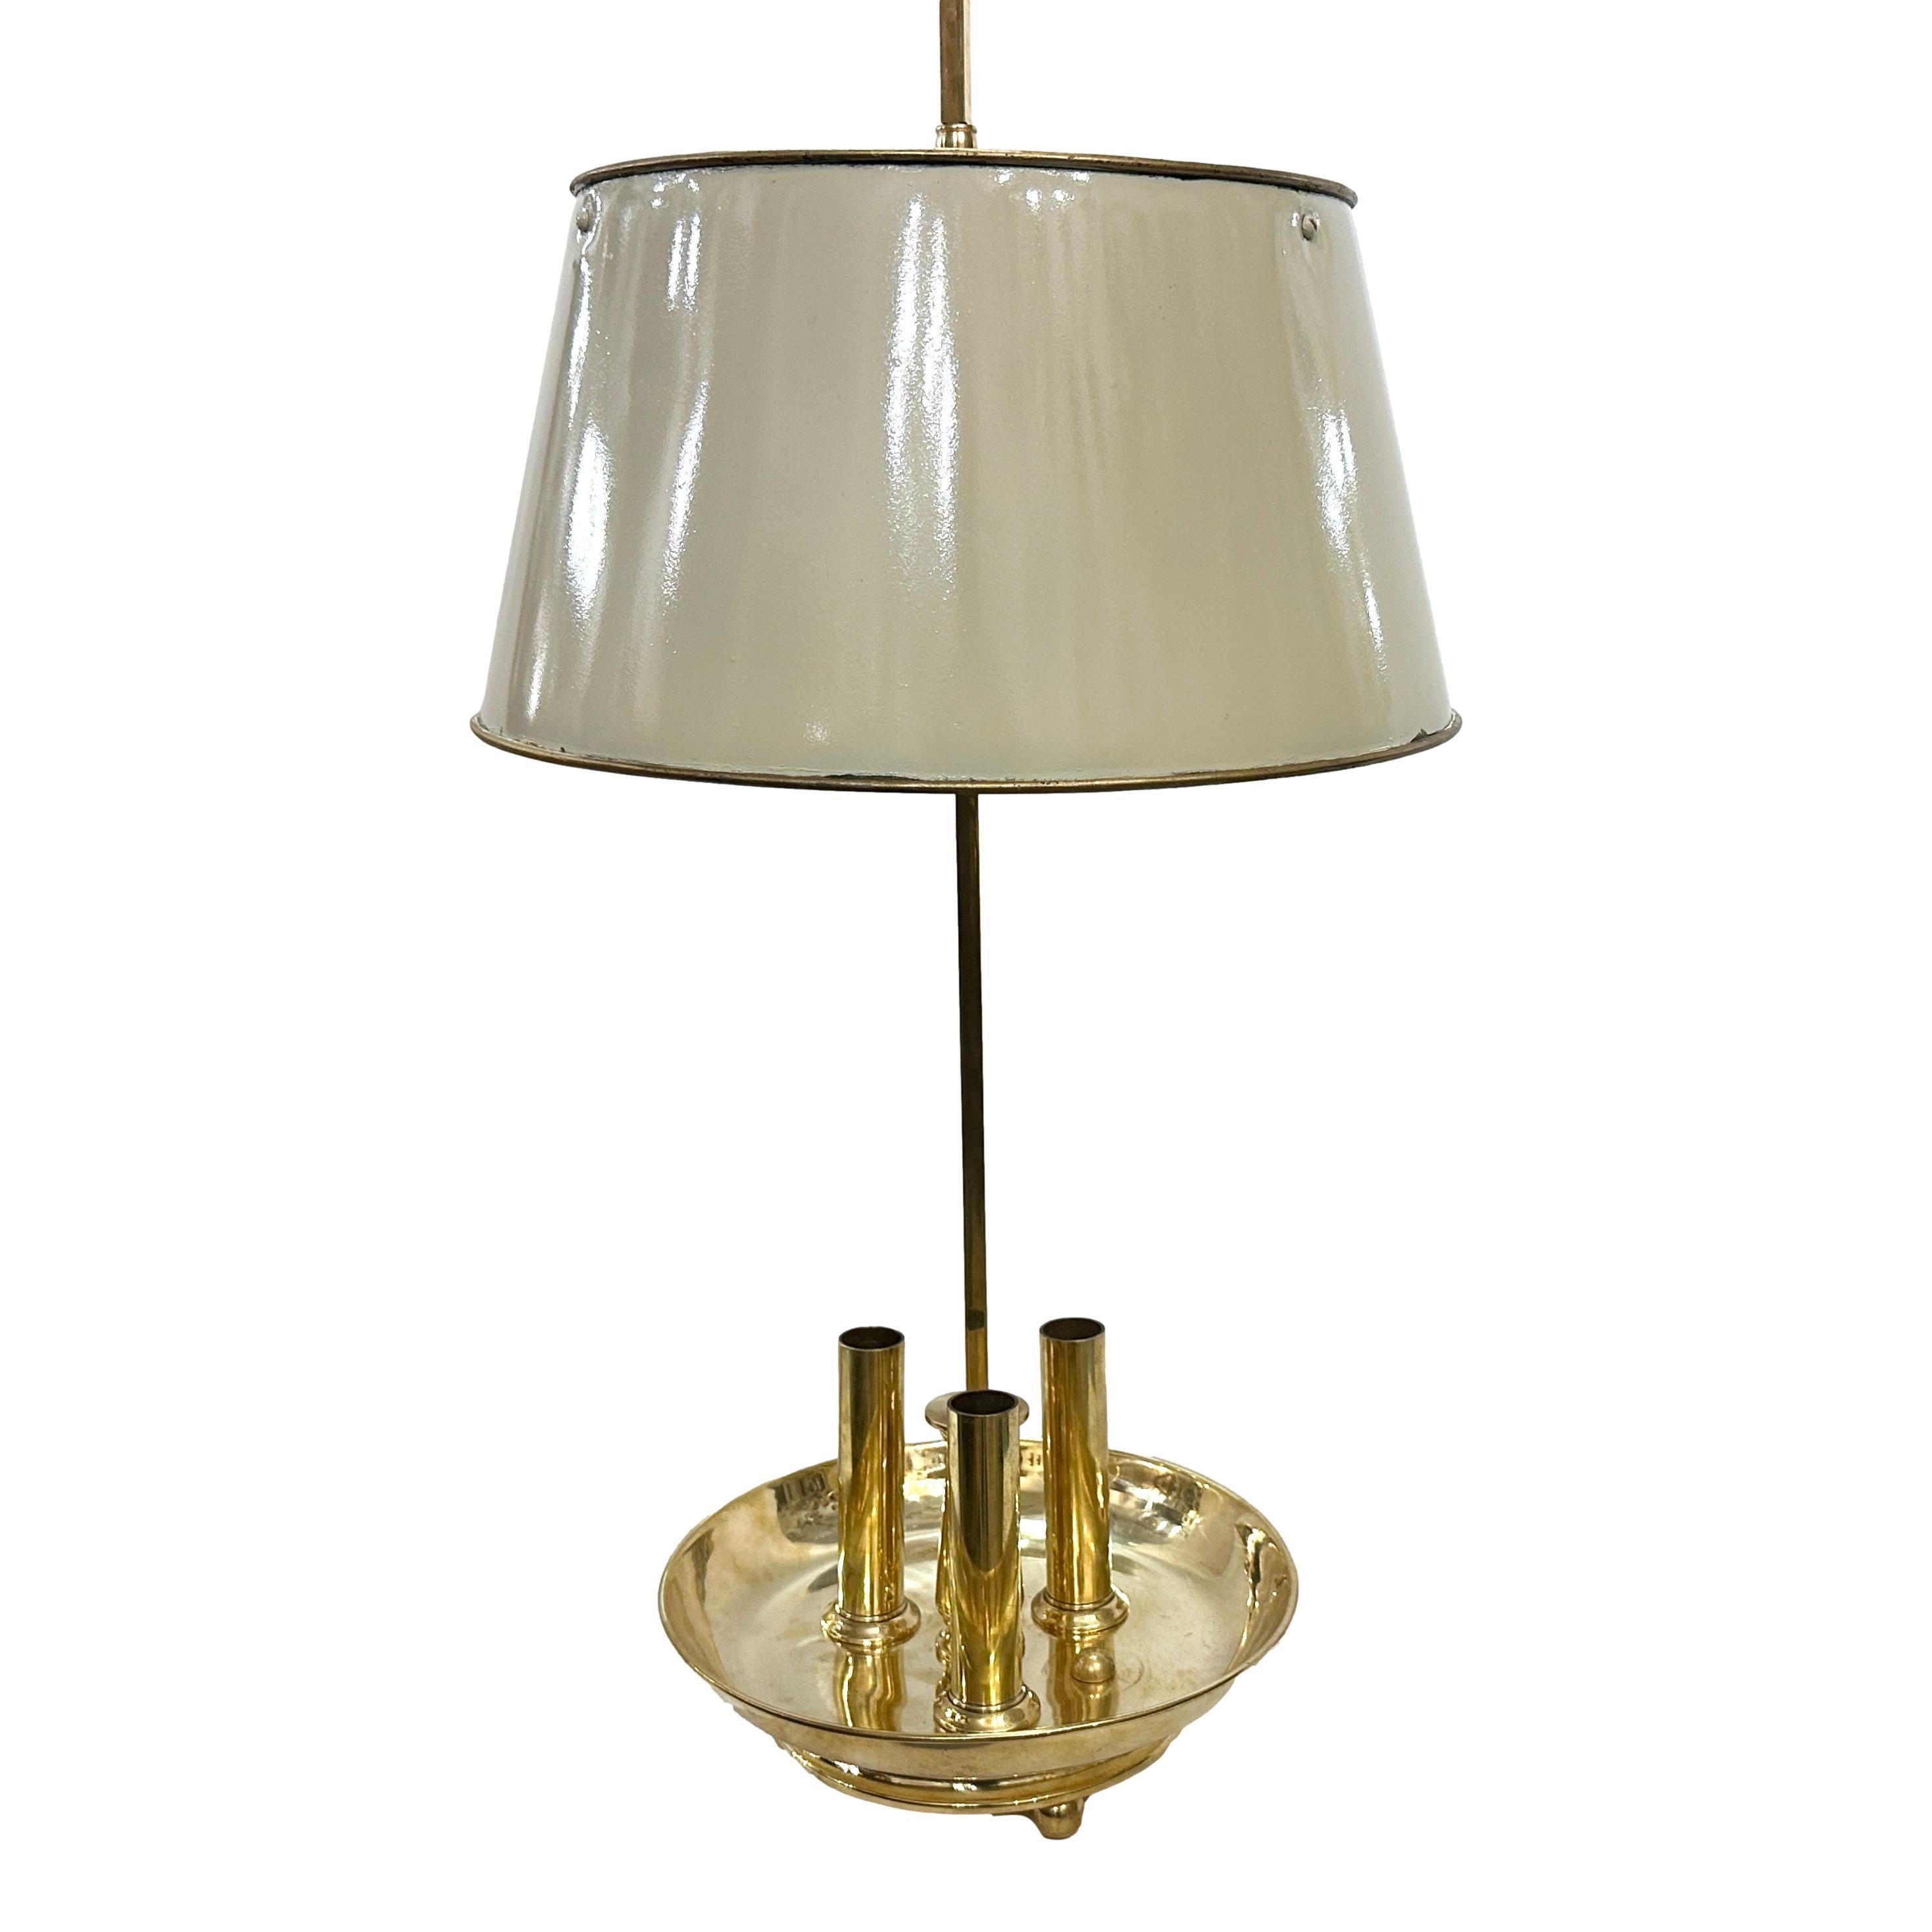 A circa 1950's French polished bronze bouillotte desk lamp with painted shade

Measurements: 
Height: 36